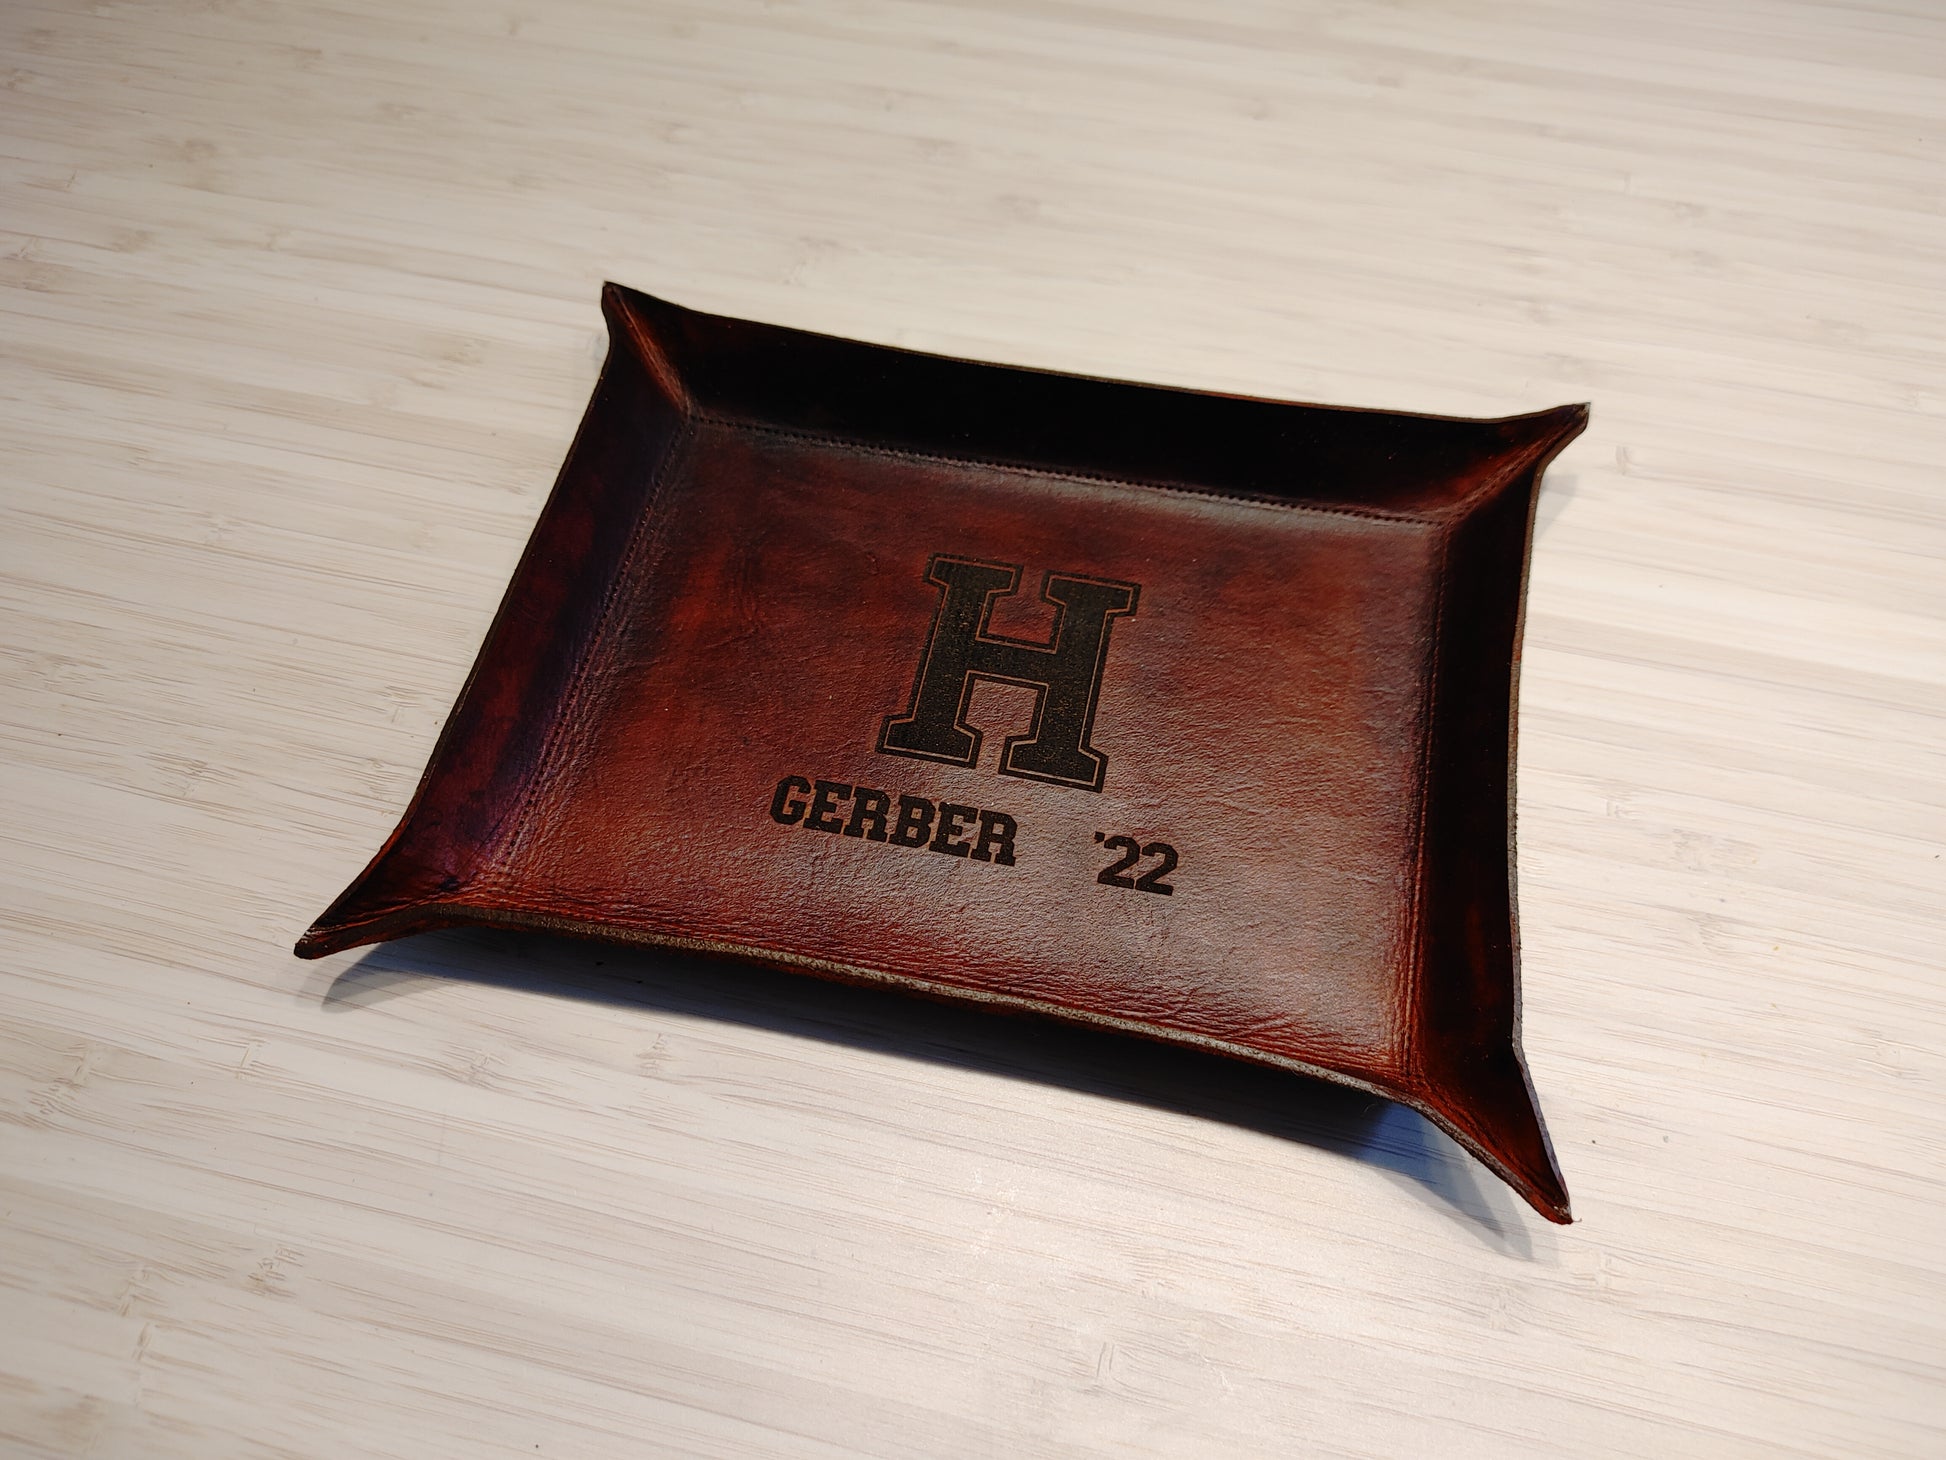 Hand-made all natural leather catch all tray stained brown with logo